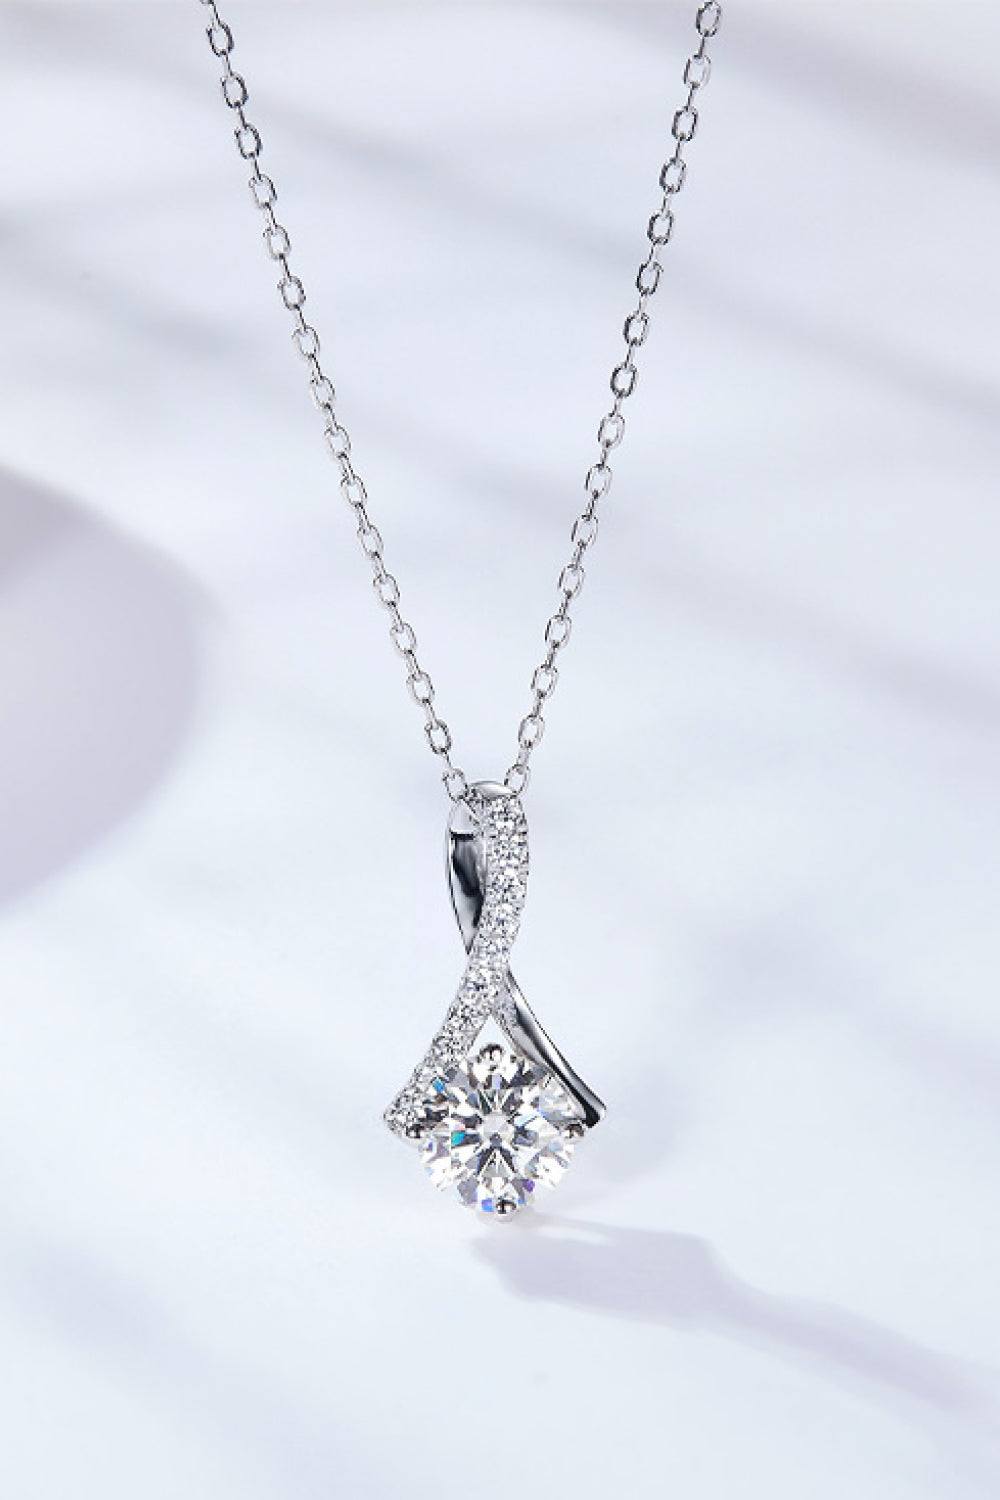 Special Occasion 1 Carat Moissanite Pendant Necklace - Necklaces - FITGGINS